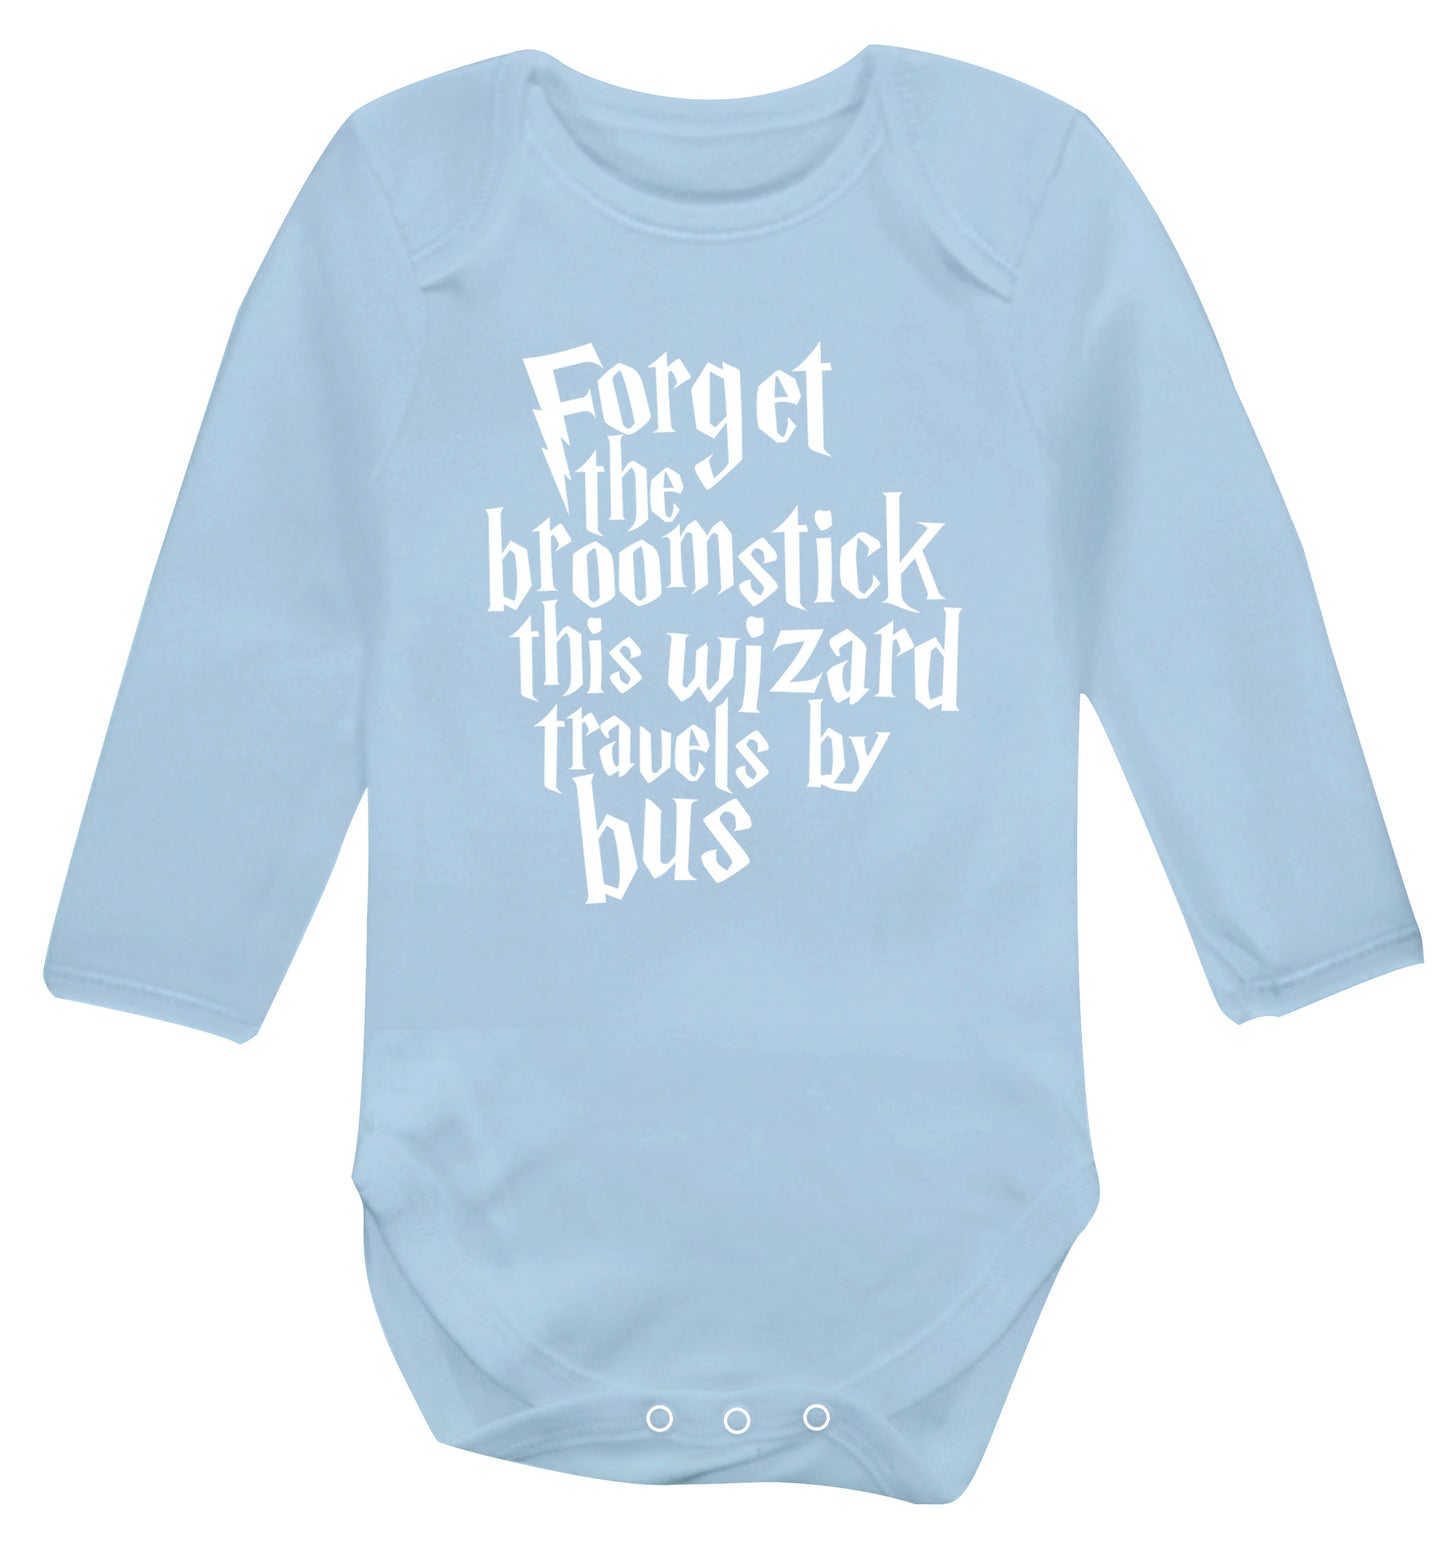 Forget the broomstick this wizard travels by bus Baby Vest long sleeved pale blue 6-12 months